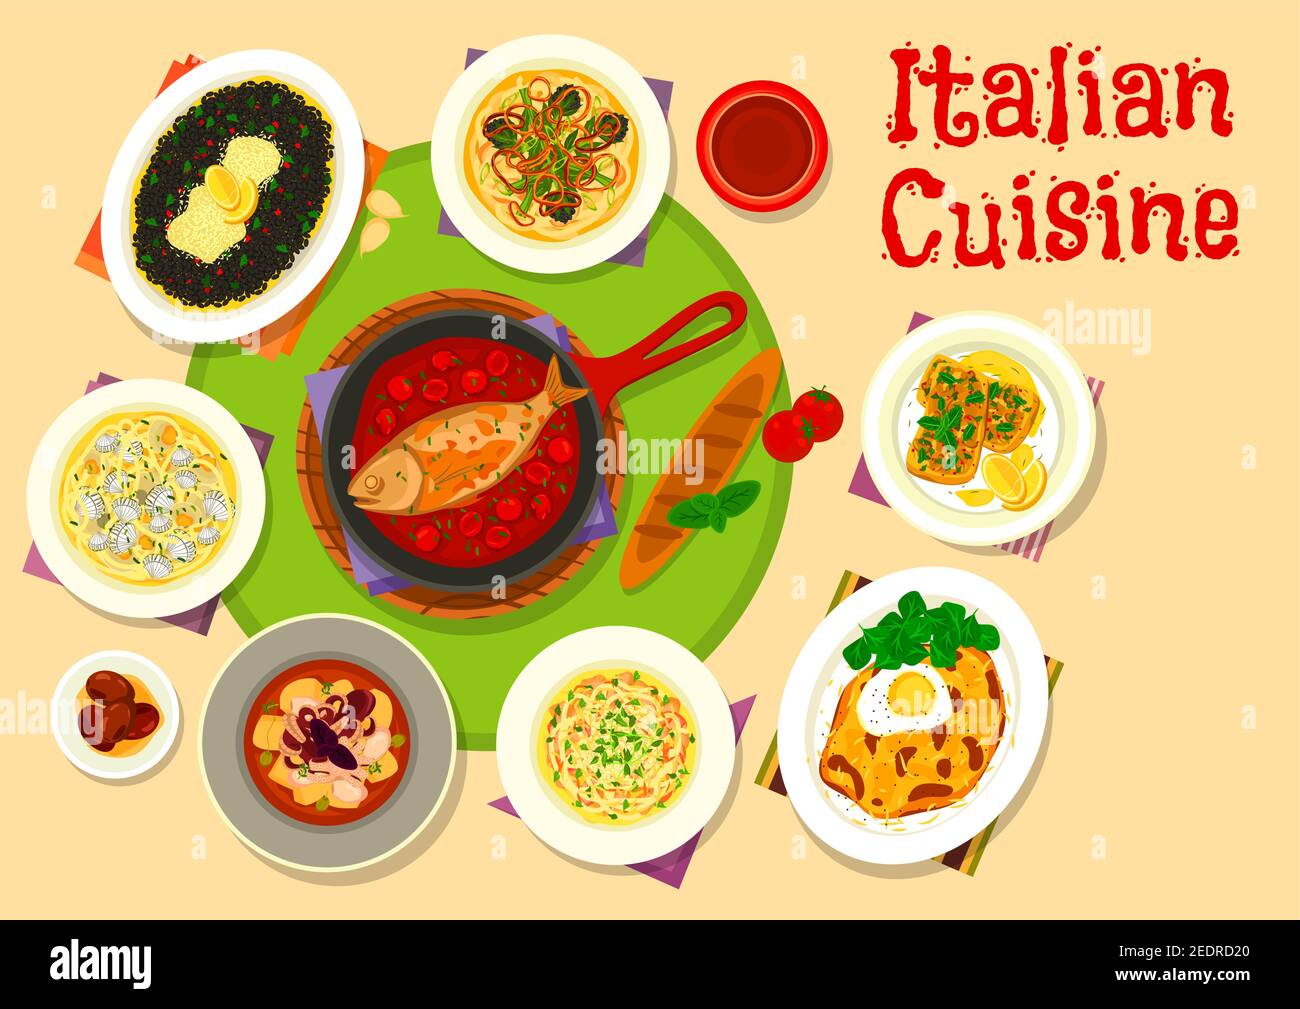 Italian cuisine lunch menu icon of pasta with clam and rabbit stew, chicken spaghetti with cheese, fish in tomato sauce, seafood risotto, octopus vege Stock Vector